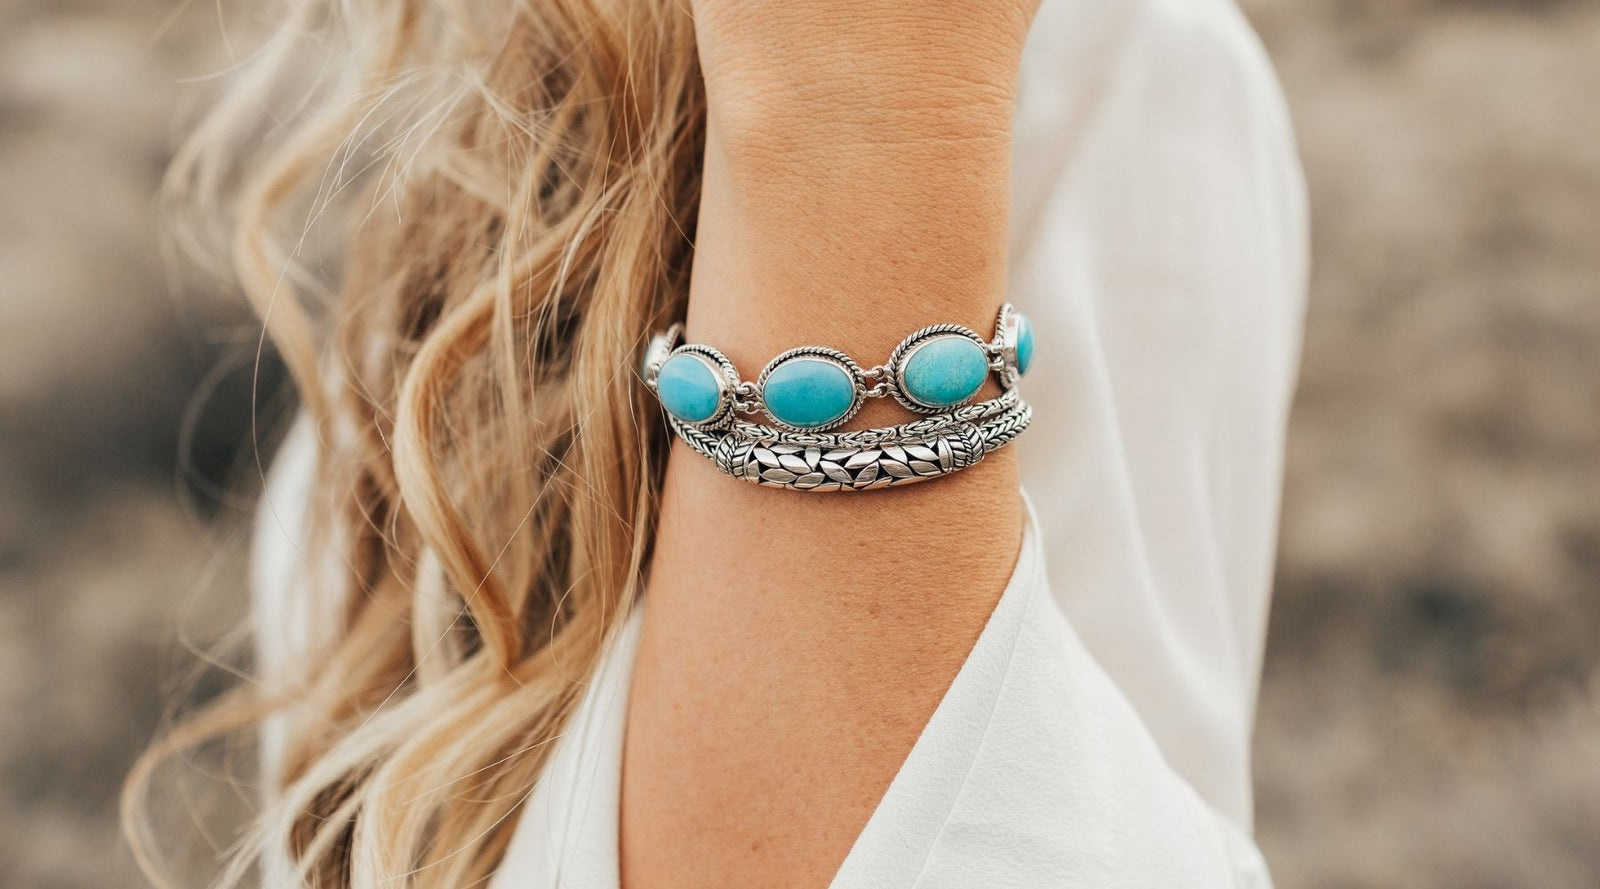 7 Factors to Consider When Buying a Bracelet